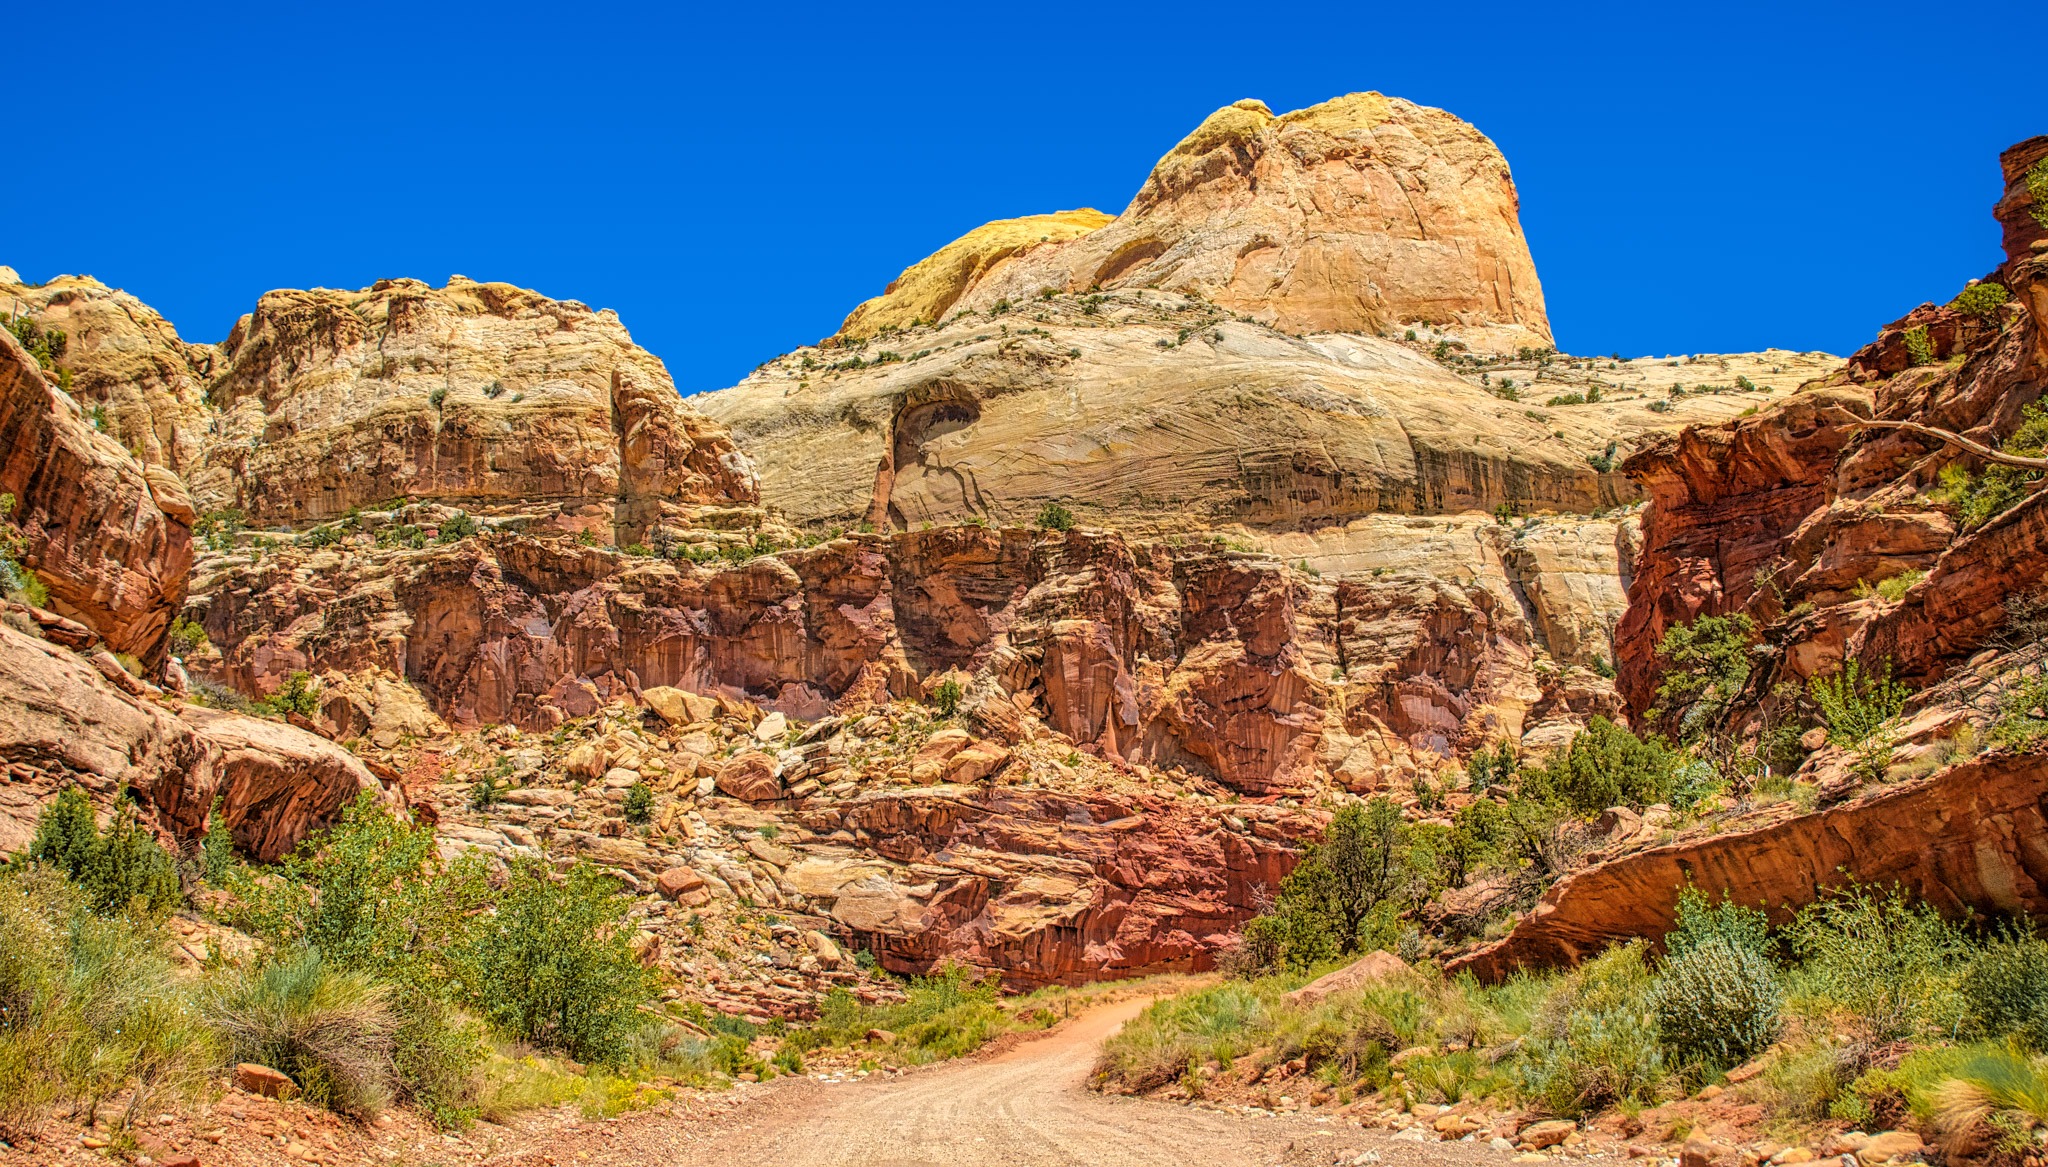 This is a view up Capitol Gorge Road, which is off Scenic Drive in Capitol Reef National Park, Utah.